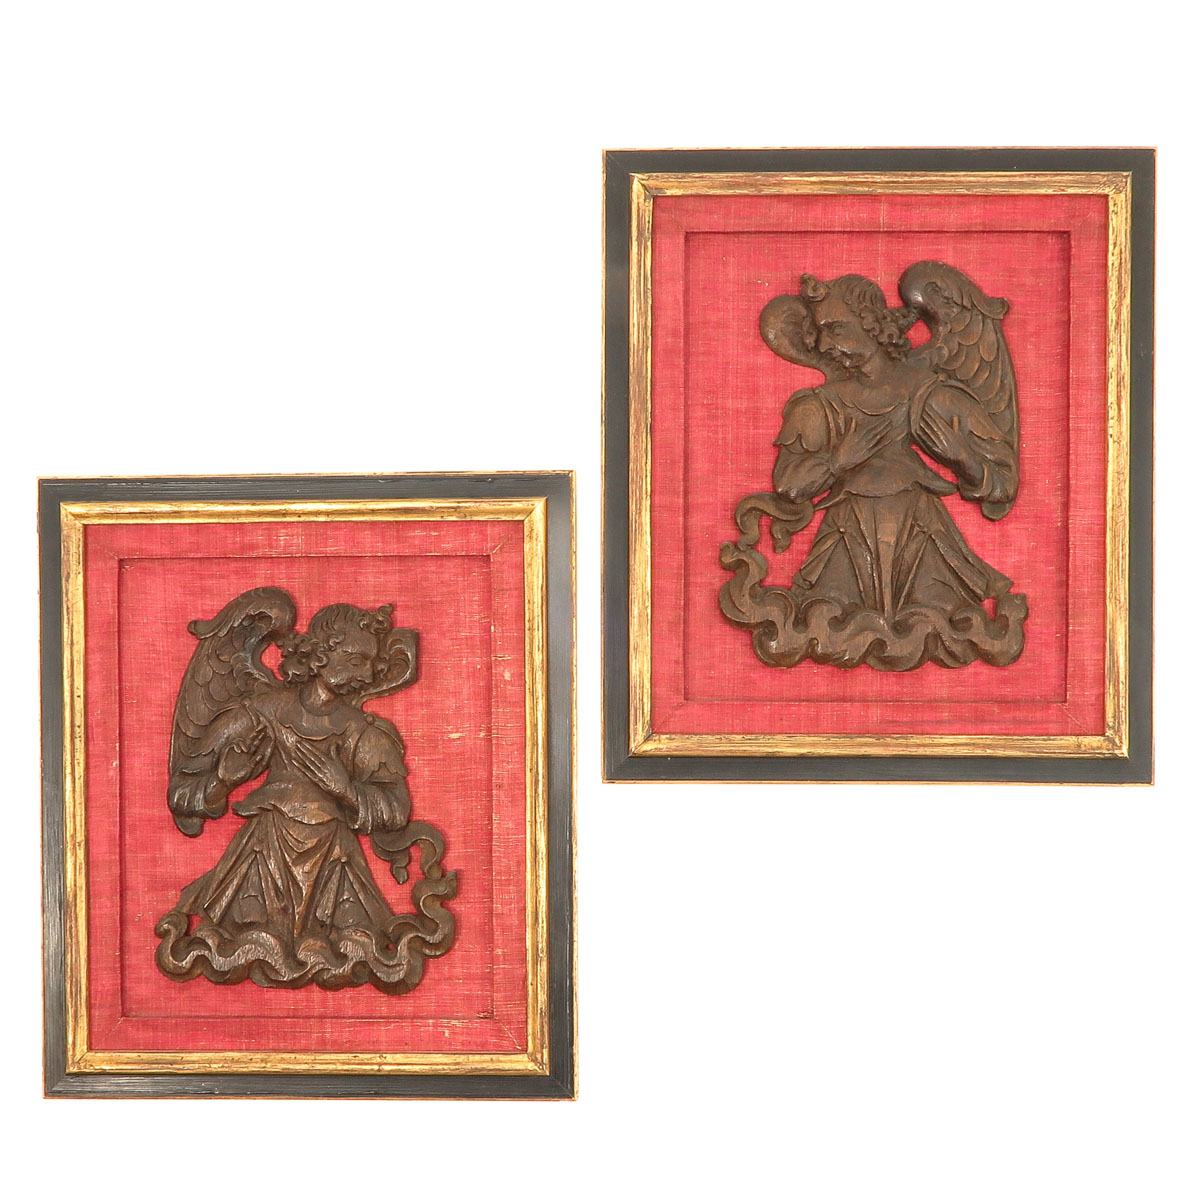 A Pair of Religious Carvings in Frames